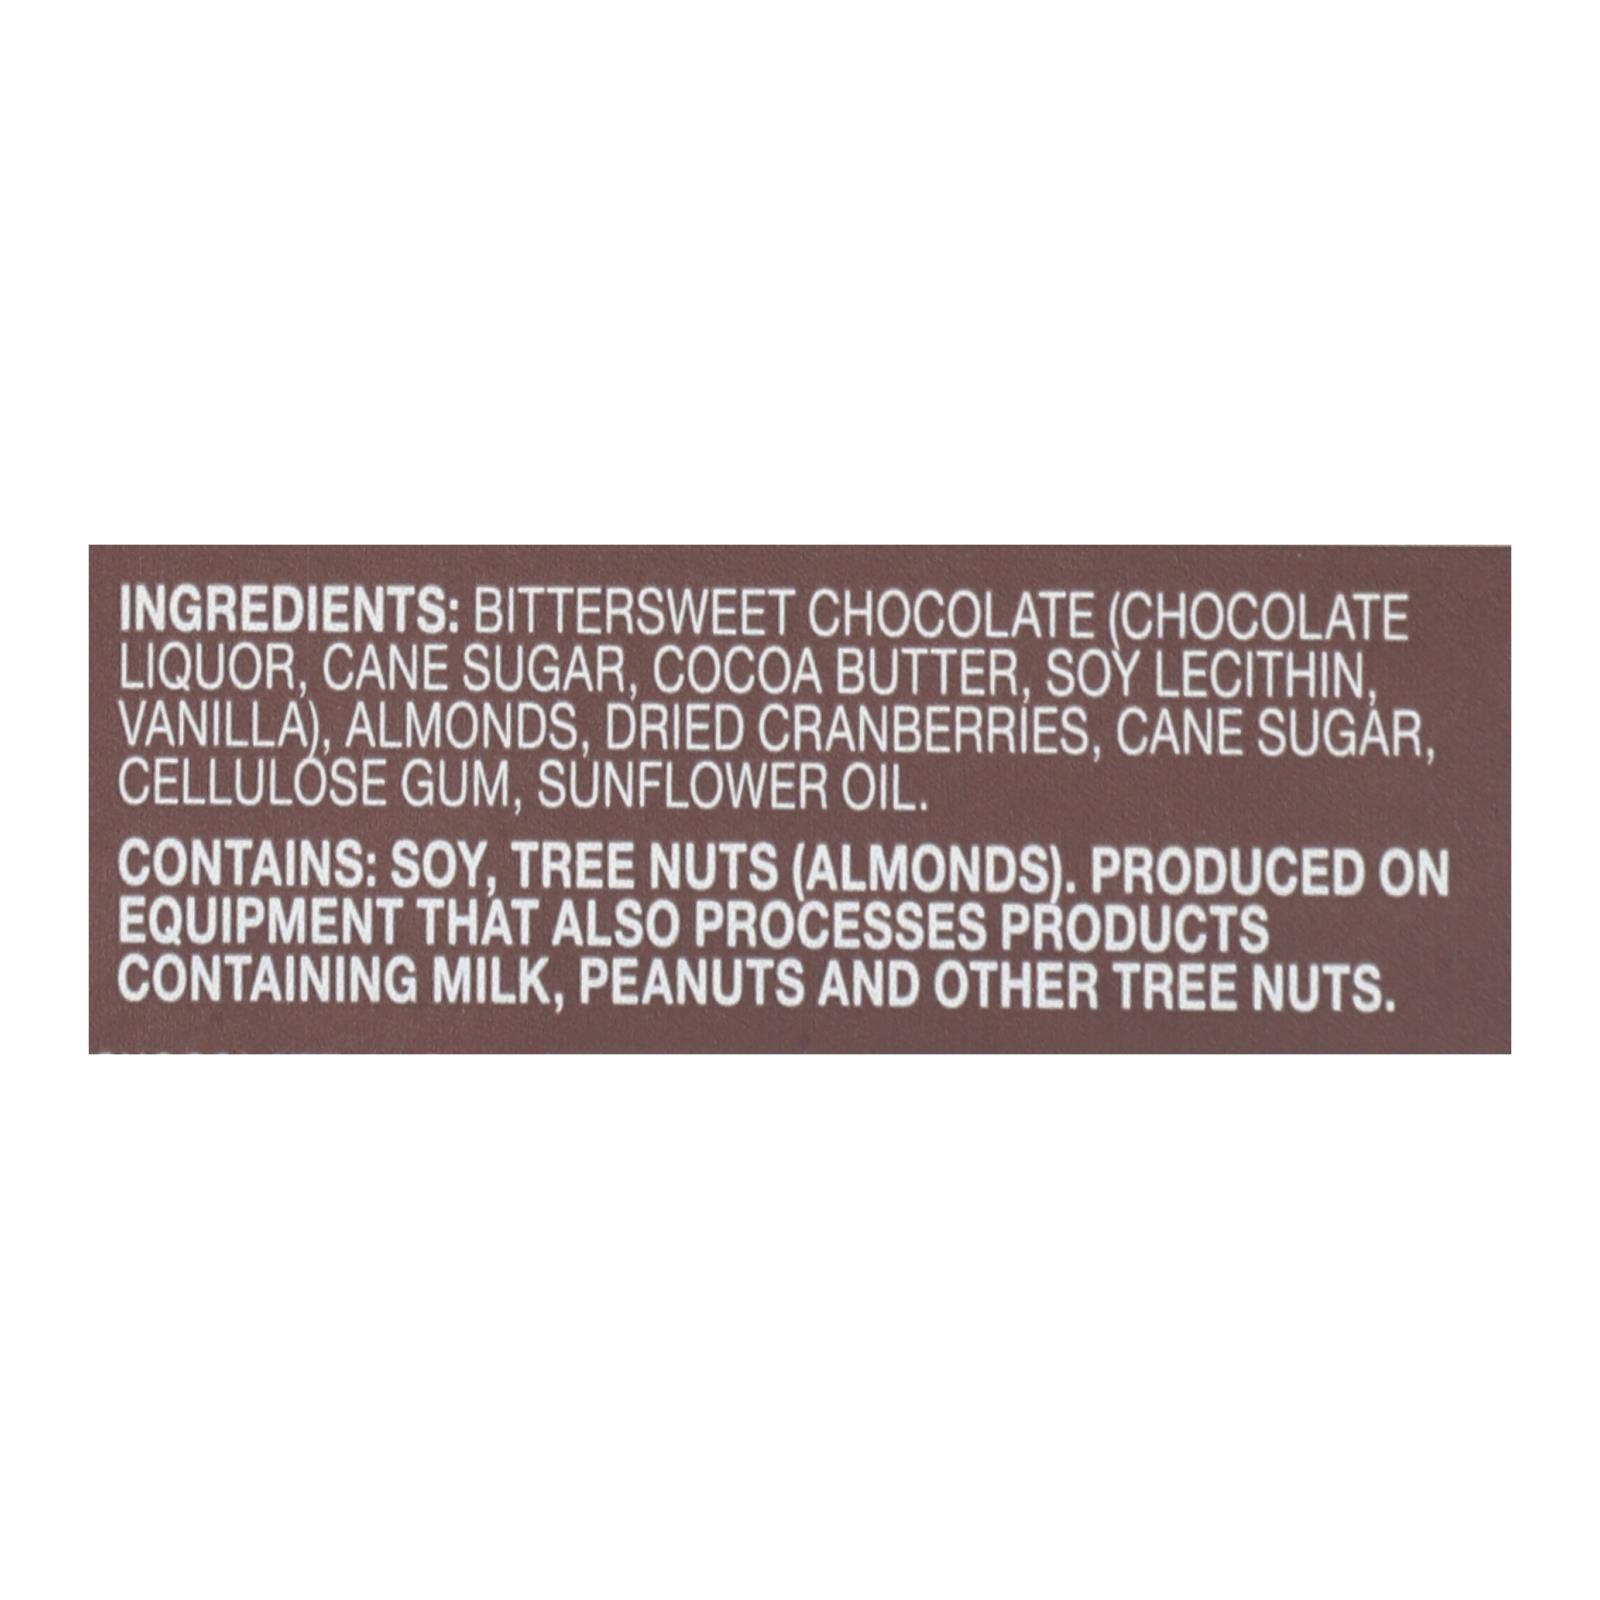 Endangered Species Natural Chocolate Bars - Dark Chocolate - 72 Percent Cocoa - Cranberries and Almonds - 3 oz Bars - Case of 12